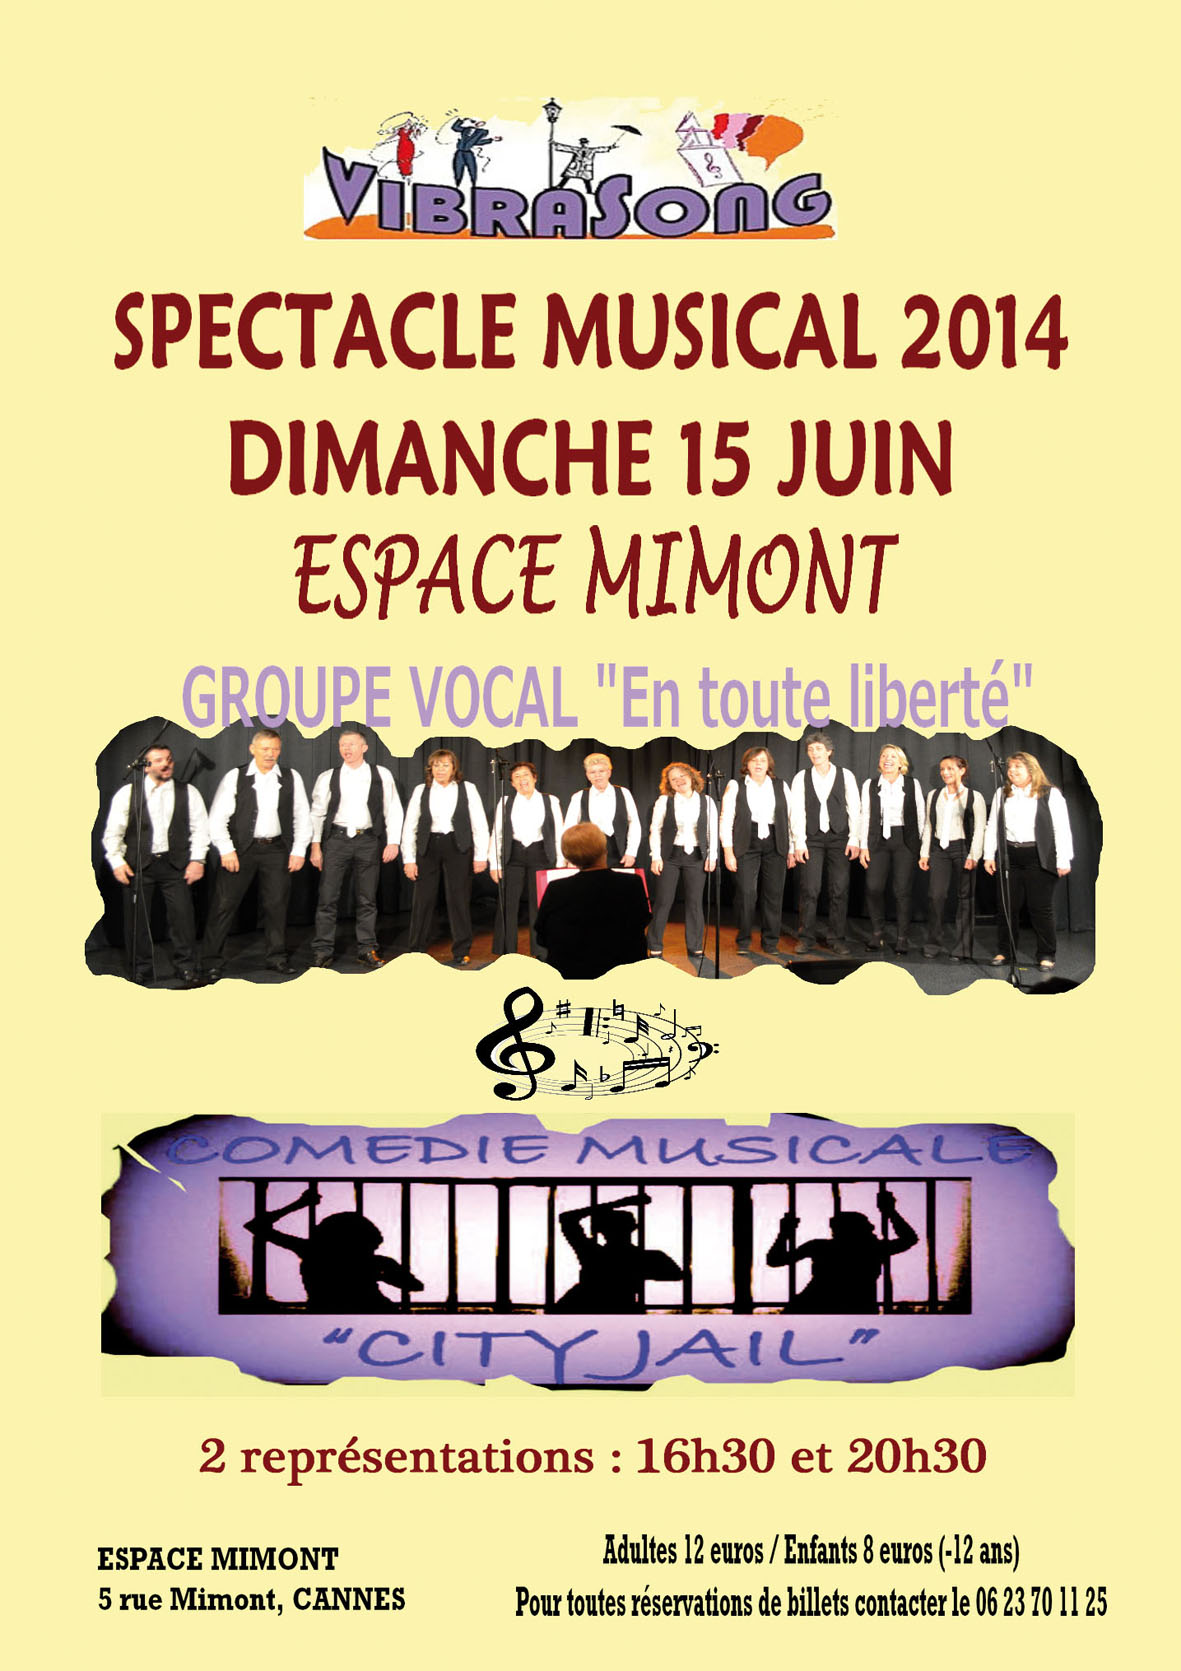 Affiche spectacle 2011